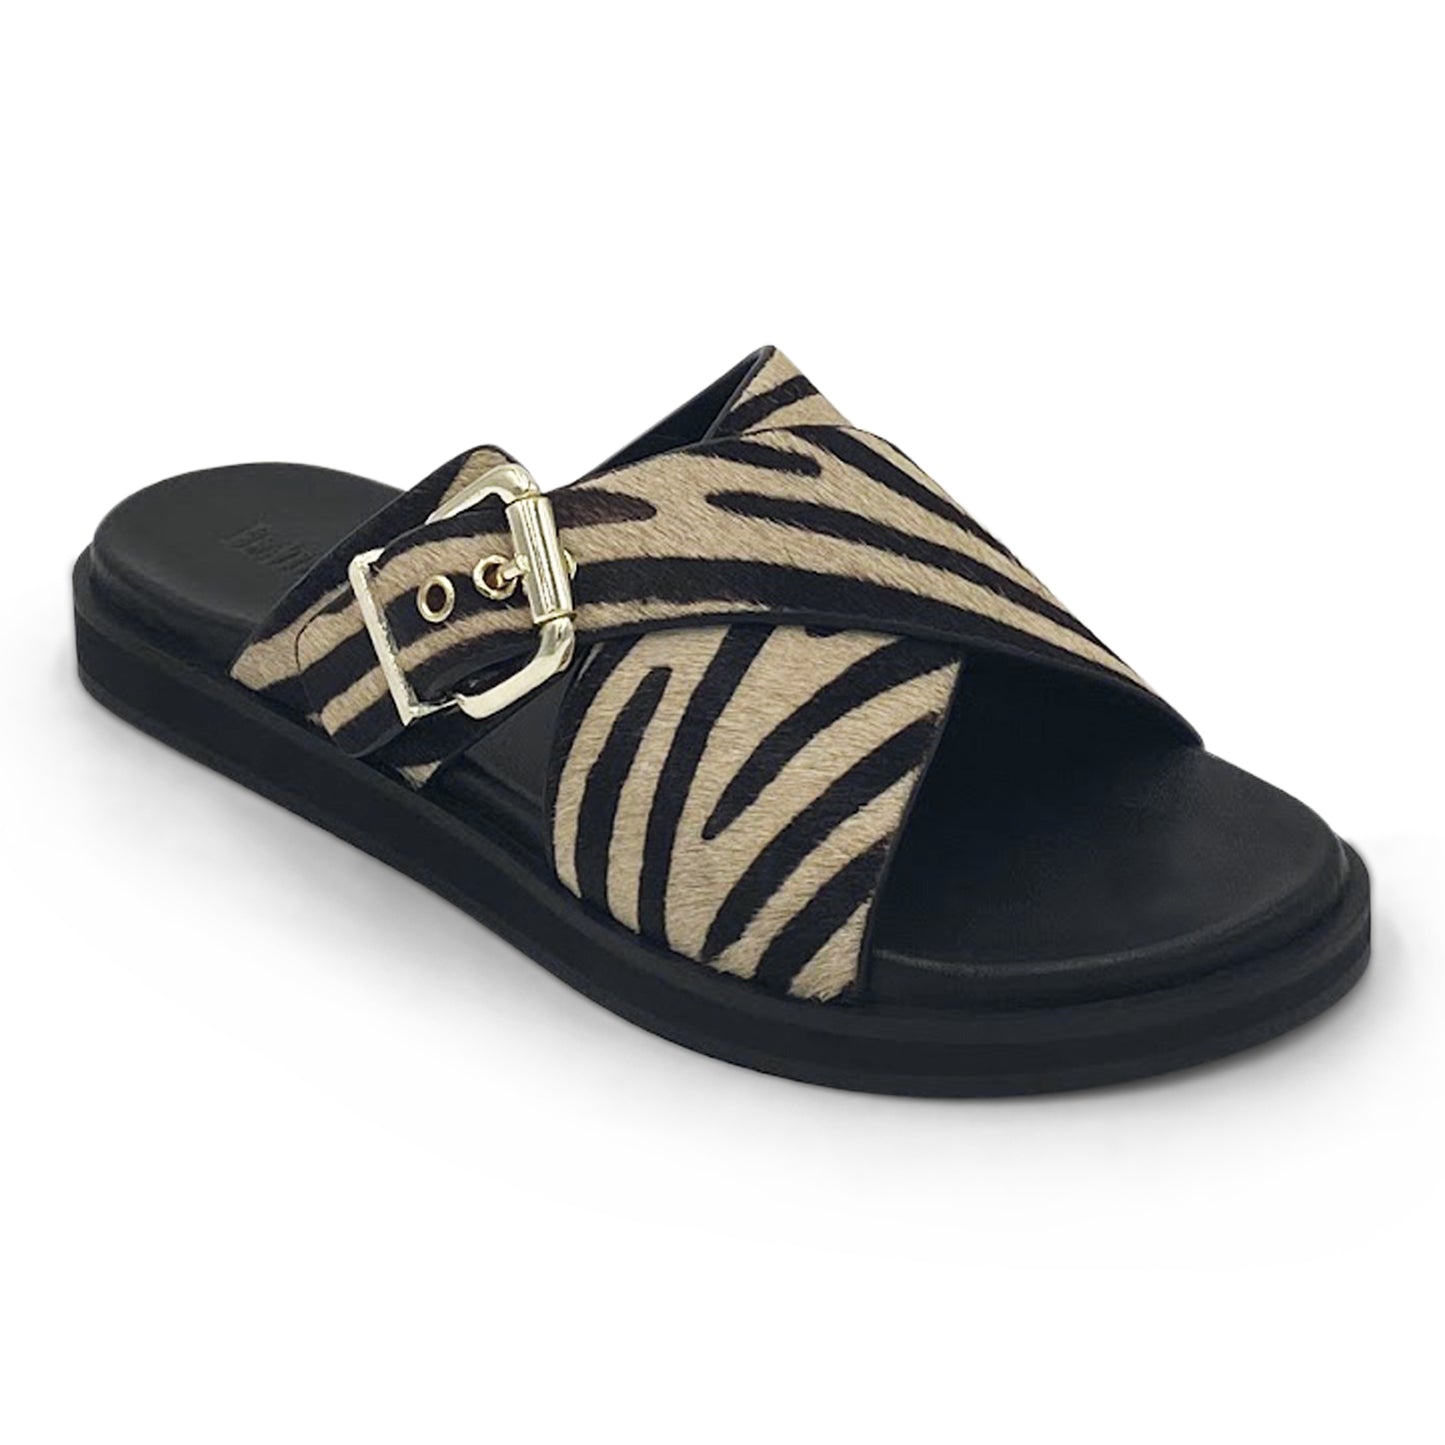 SIDE VIEW OF WIDE FIT ZEBRA PRINT SANDAL WITH GOLD BUCKLE